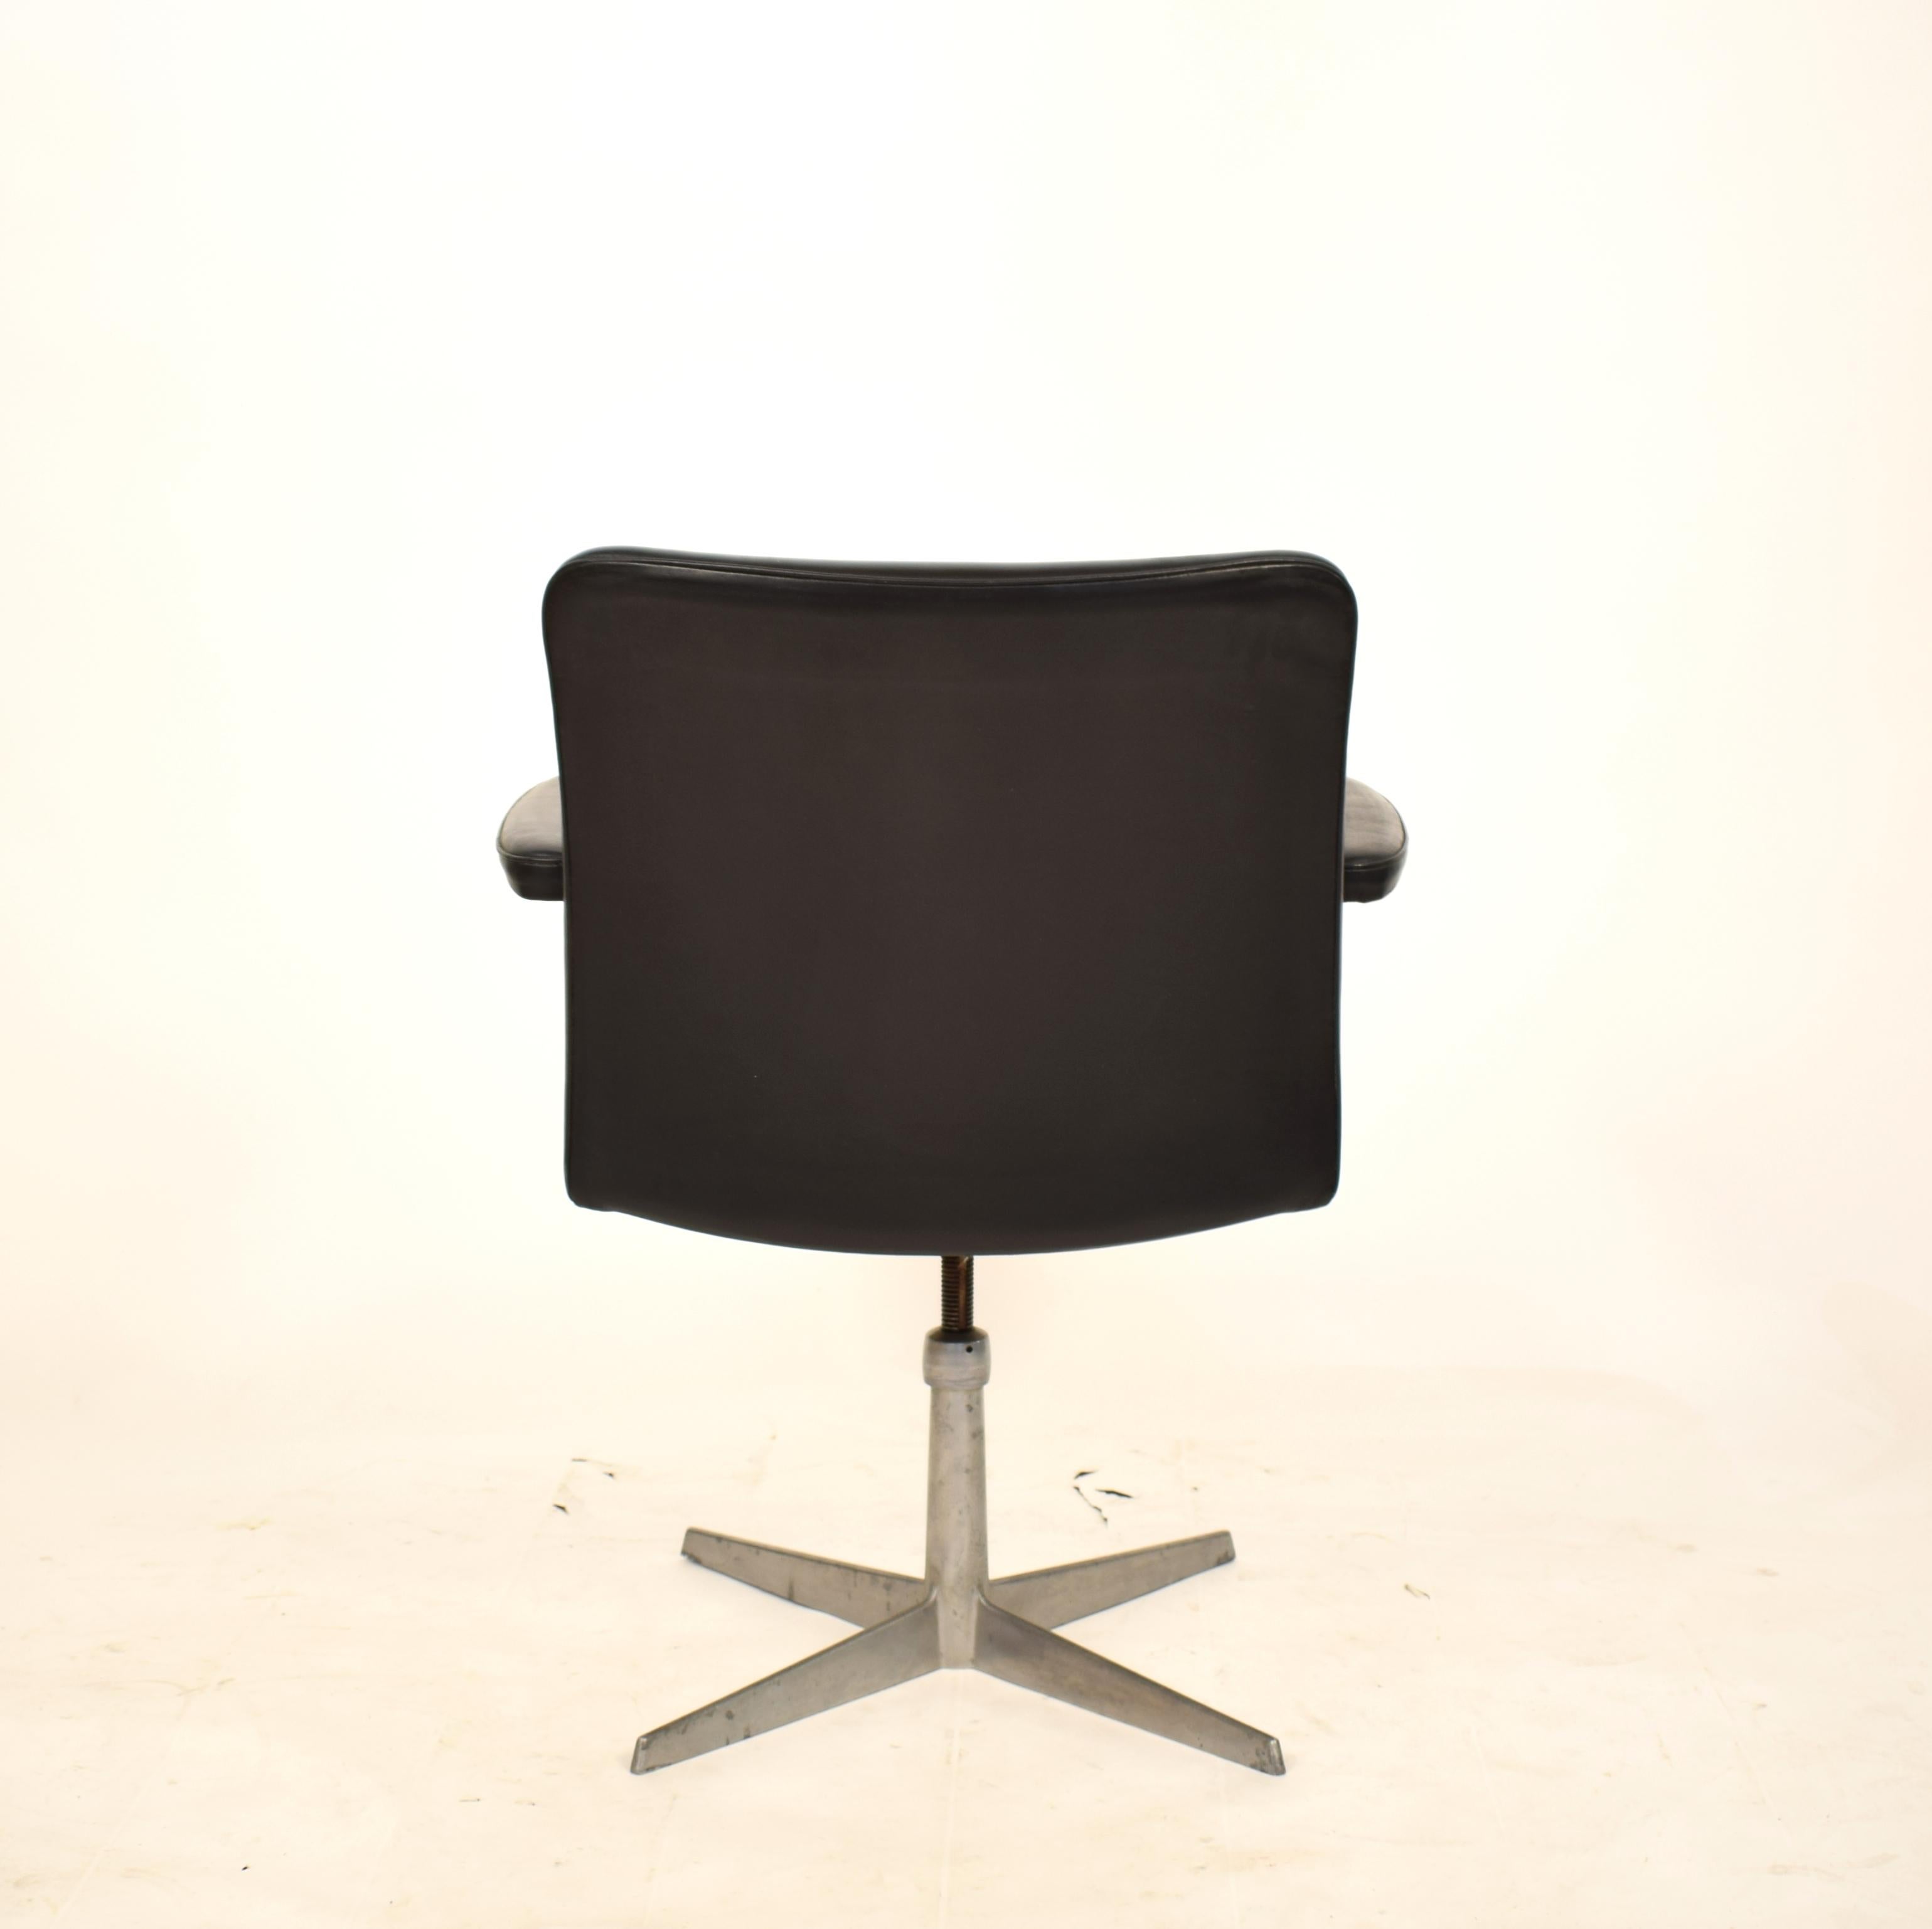 Midcentury Scandinavian Armchair in Black Leather and Aluminum, circa 1970 For Sale 3